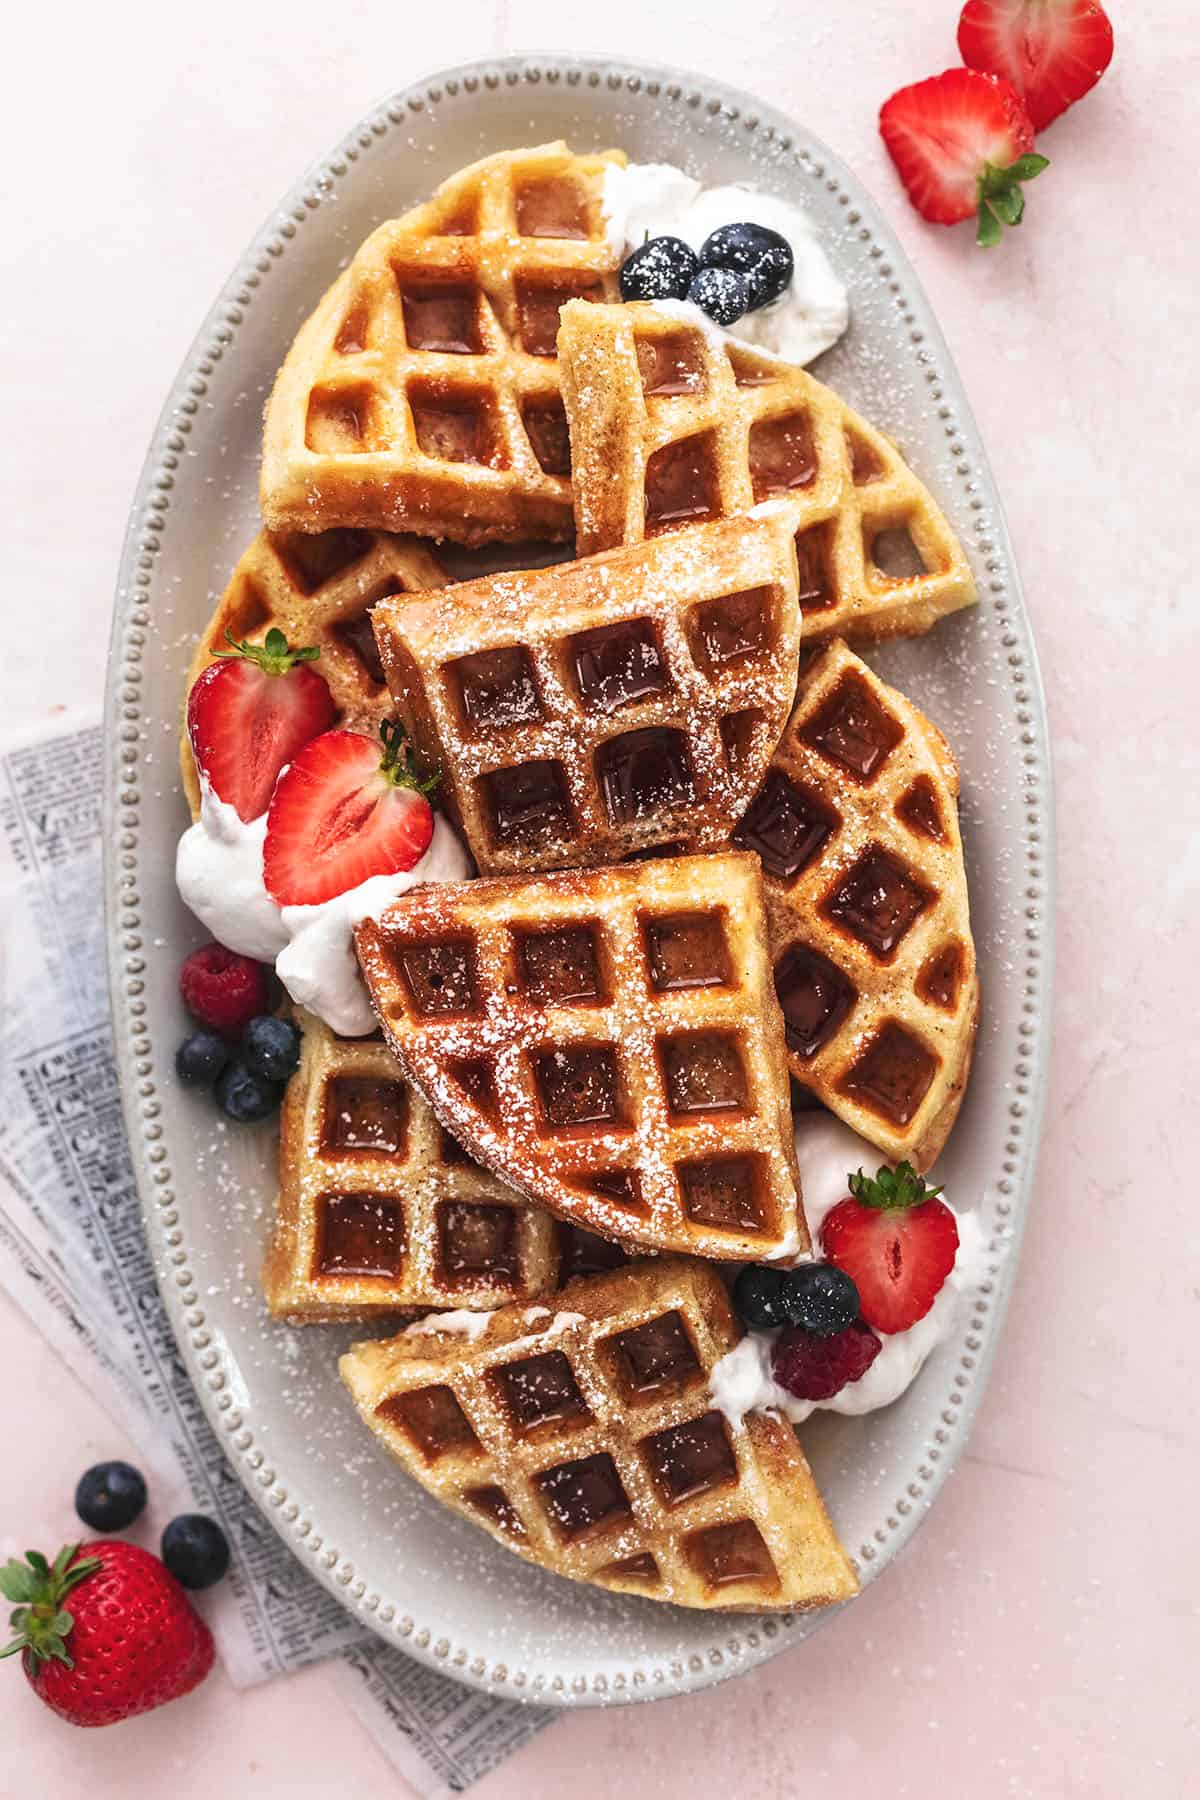 waffles on a plate with berries and whipped cream